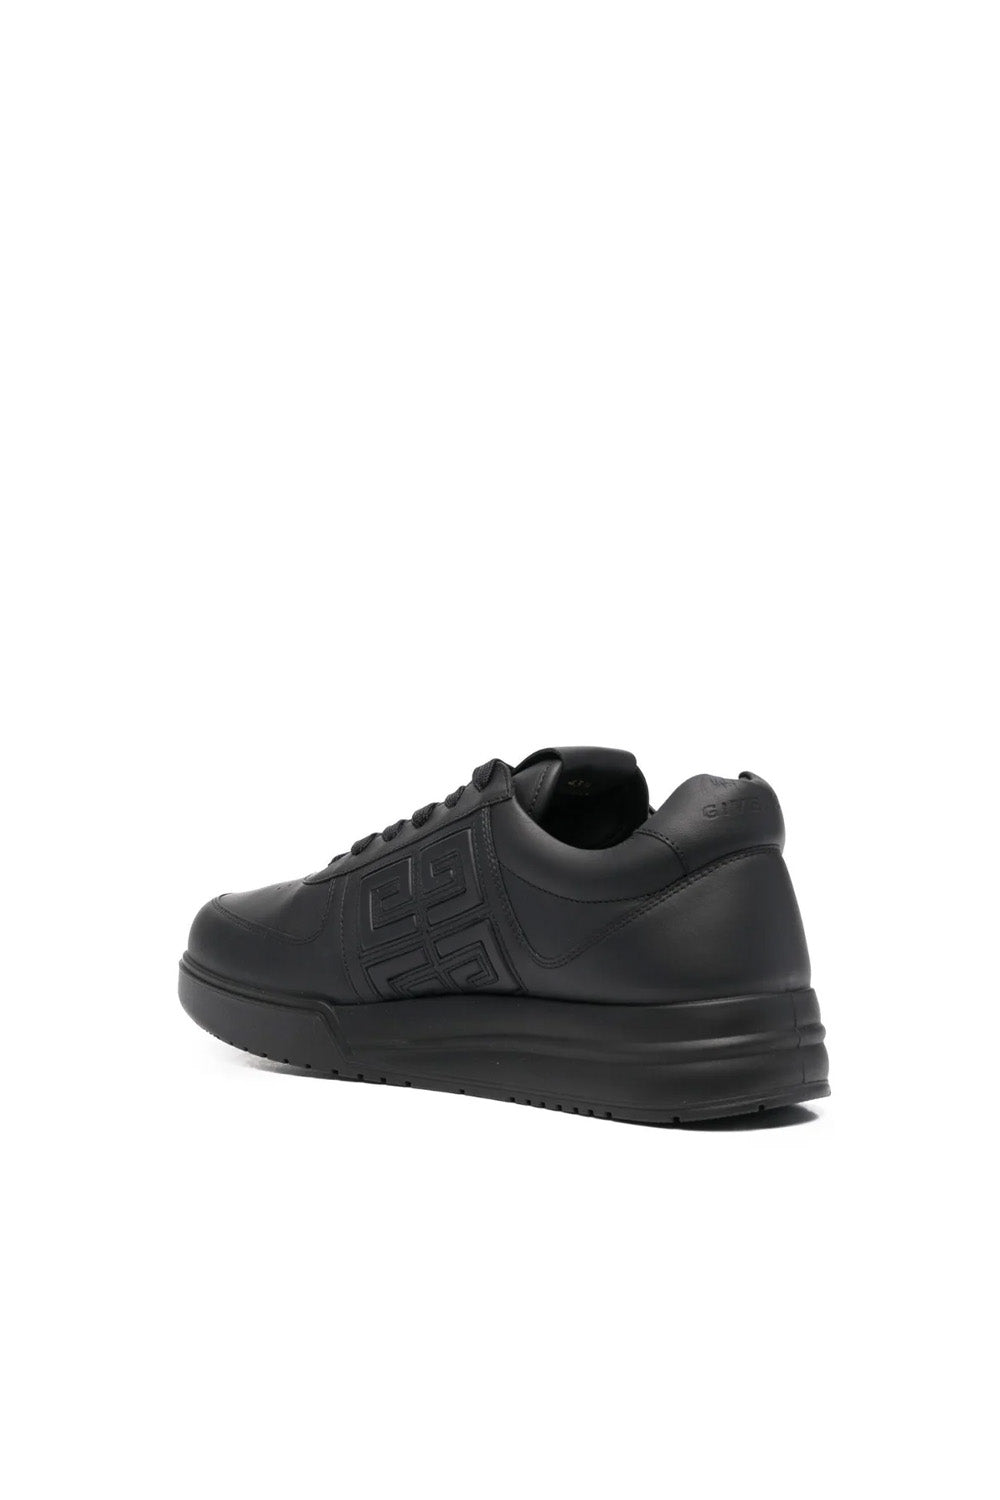 GIVENCHY Black G4 Leather Low Top Sneakers